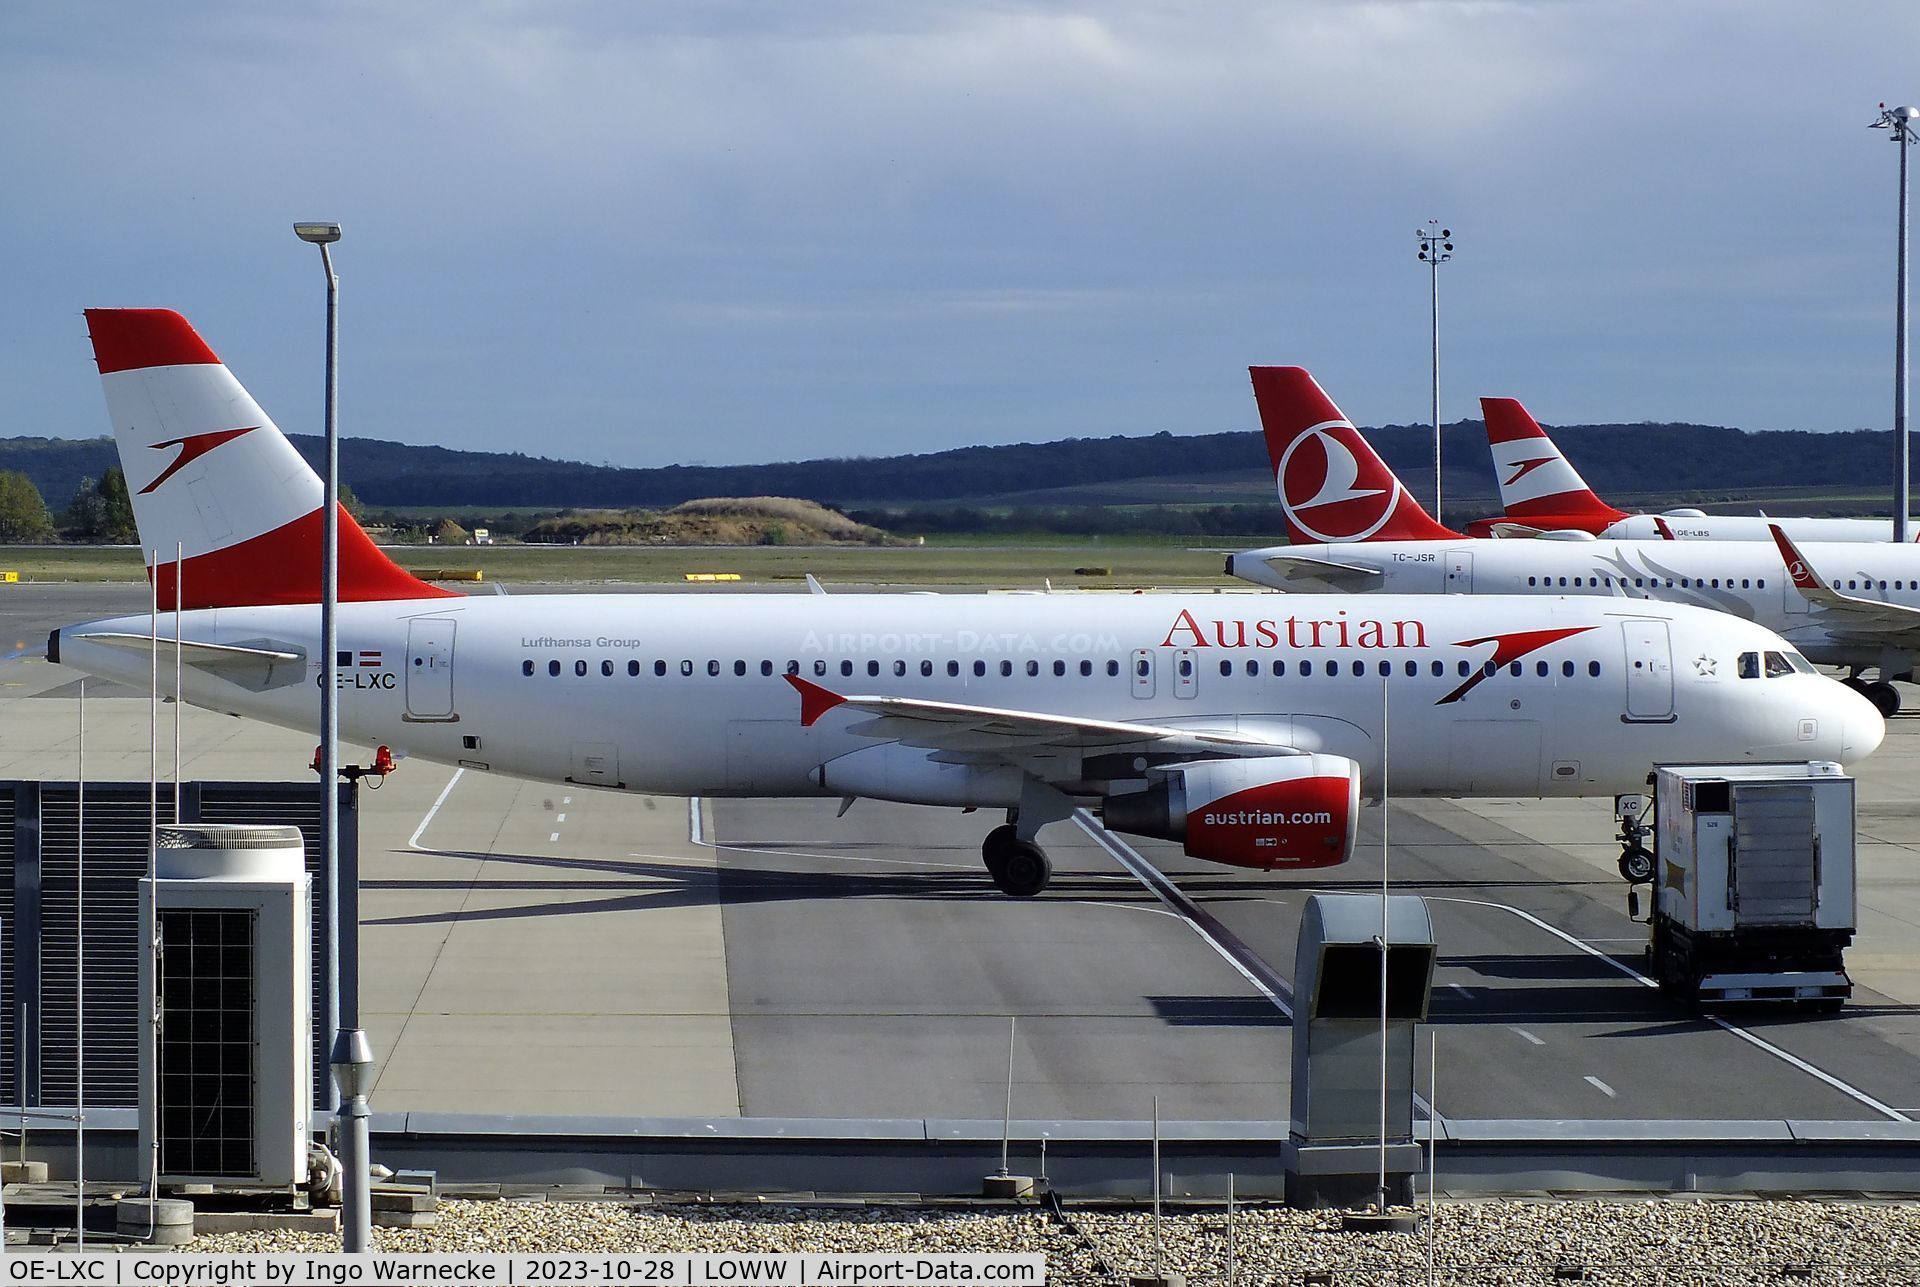 OE-LXC, 2008 Airbus A320-216 C/N 3502, Airbus A320-216 of Austrian Airlines at Wien-Schwechat airport